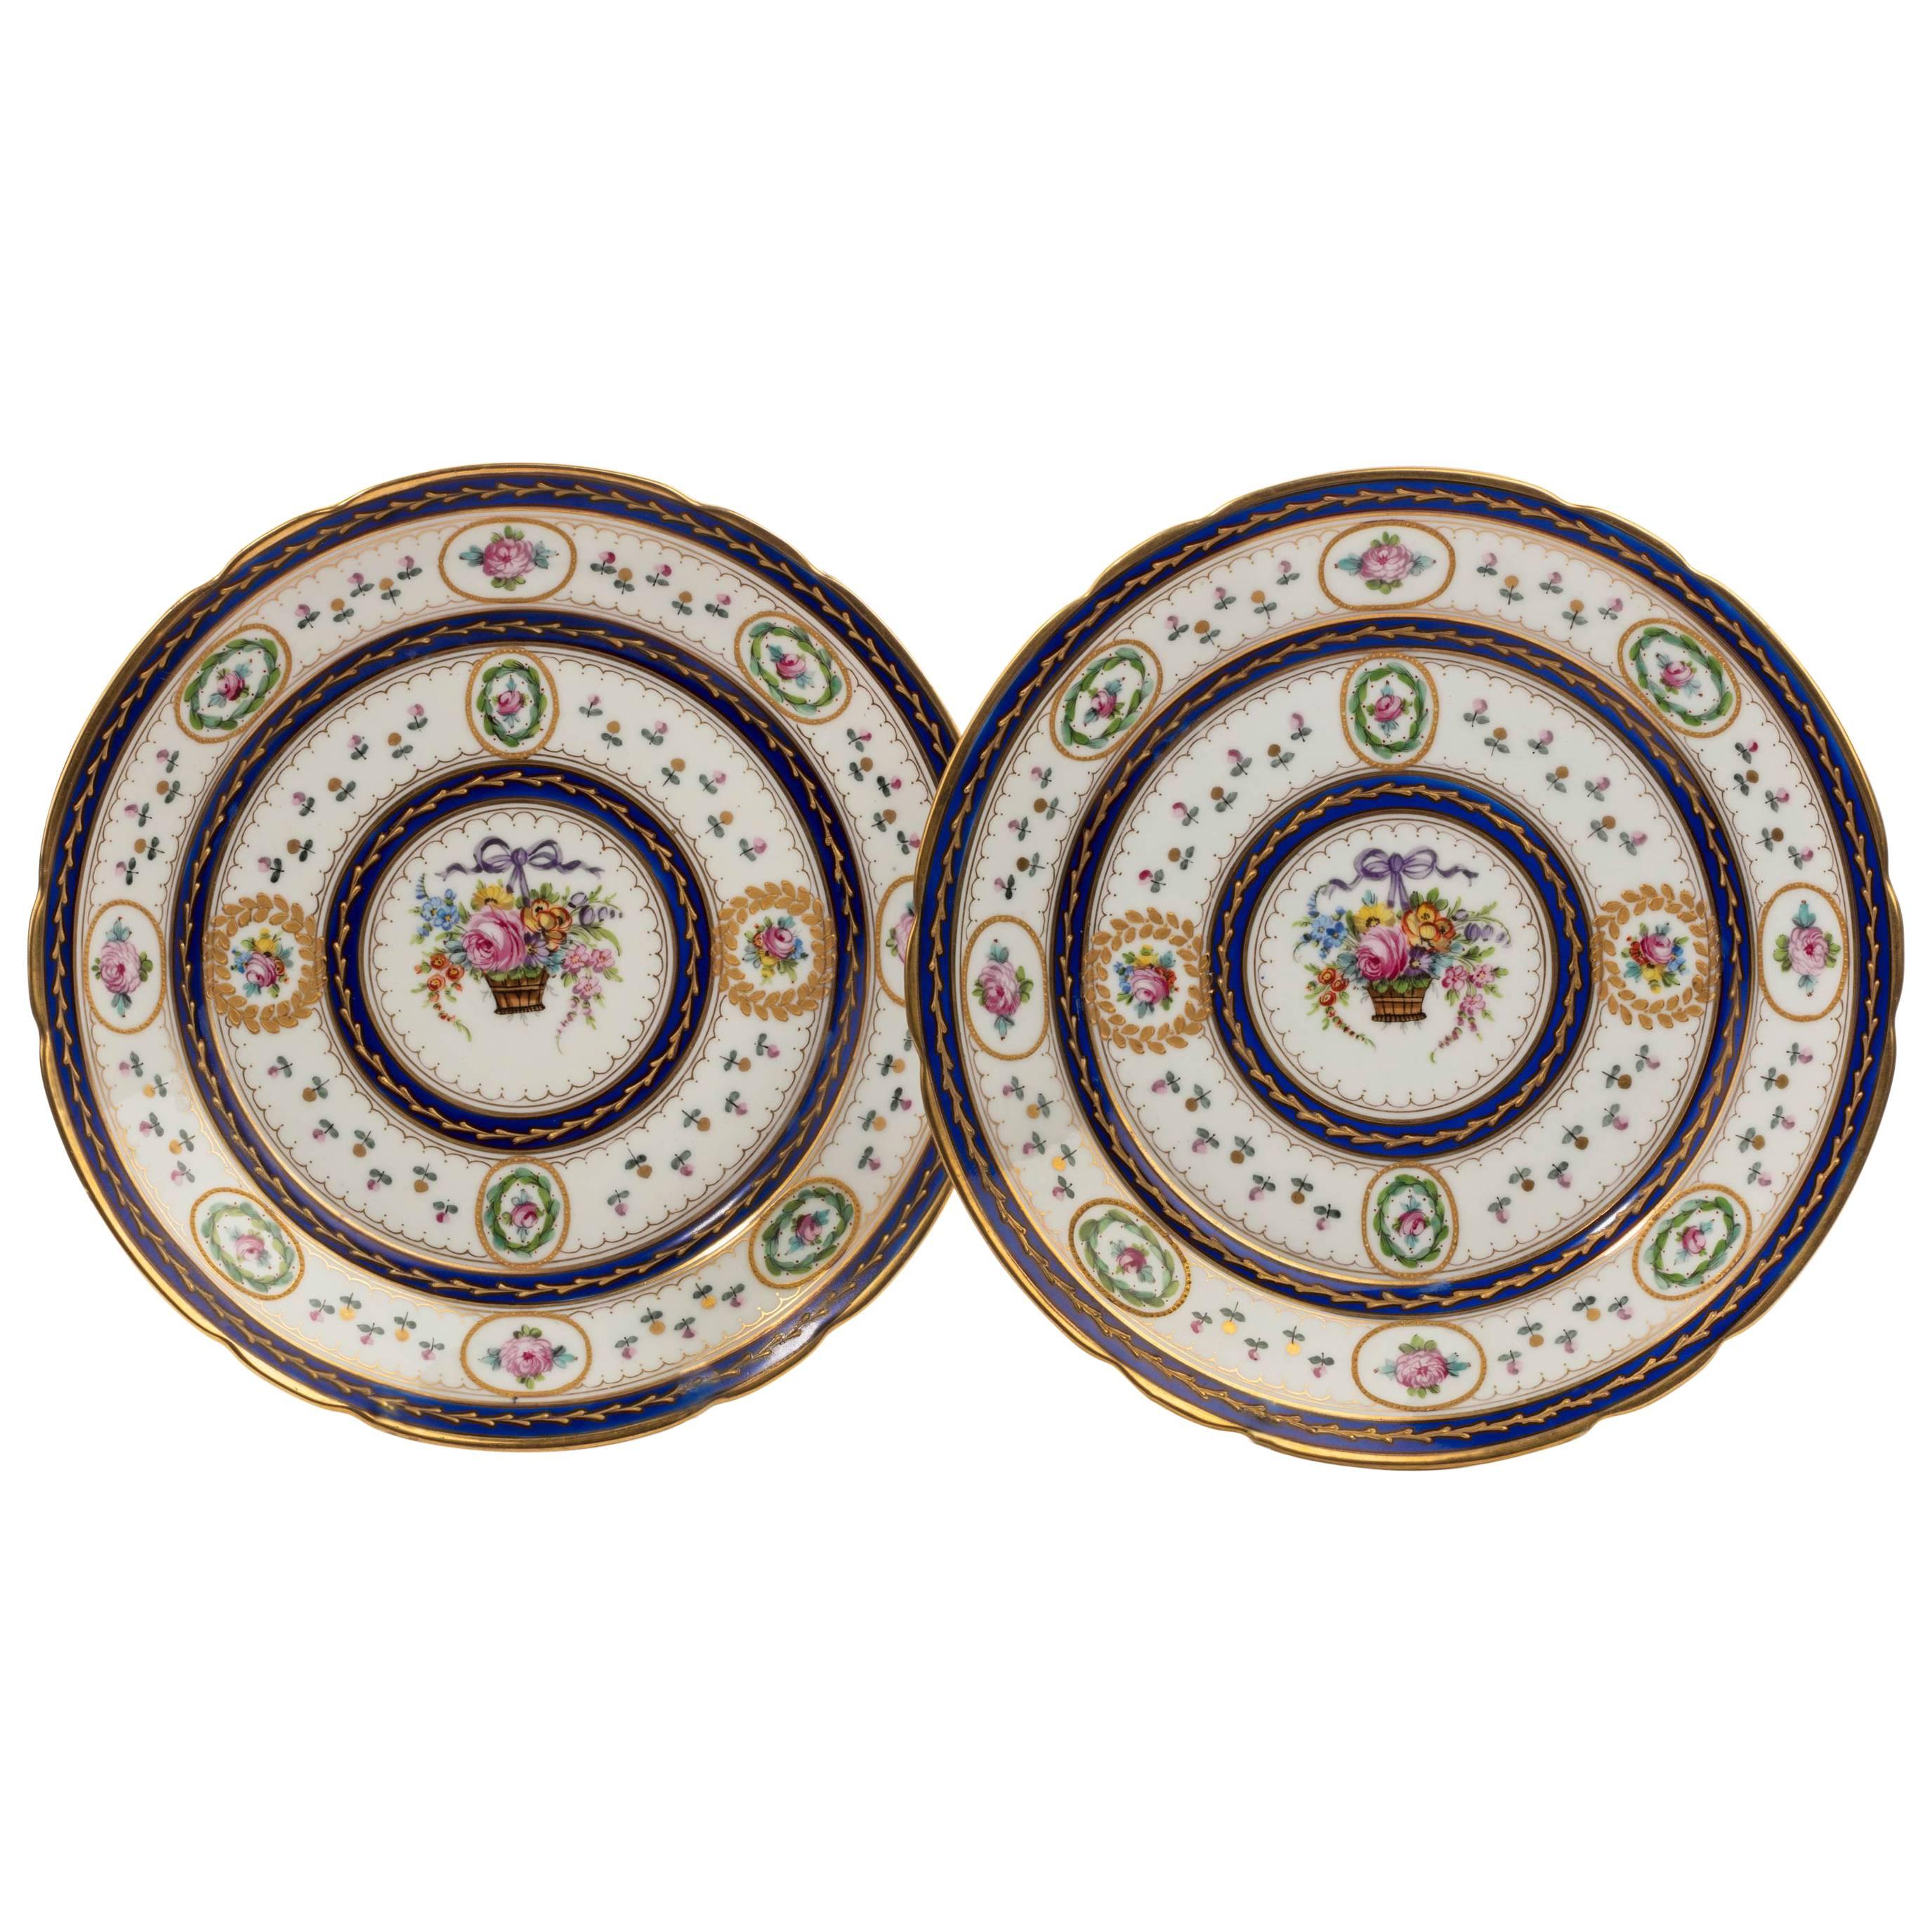 Pair of Late 19th Century Serve Porcelain Enameled Plates